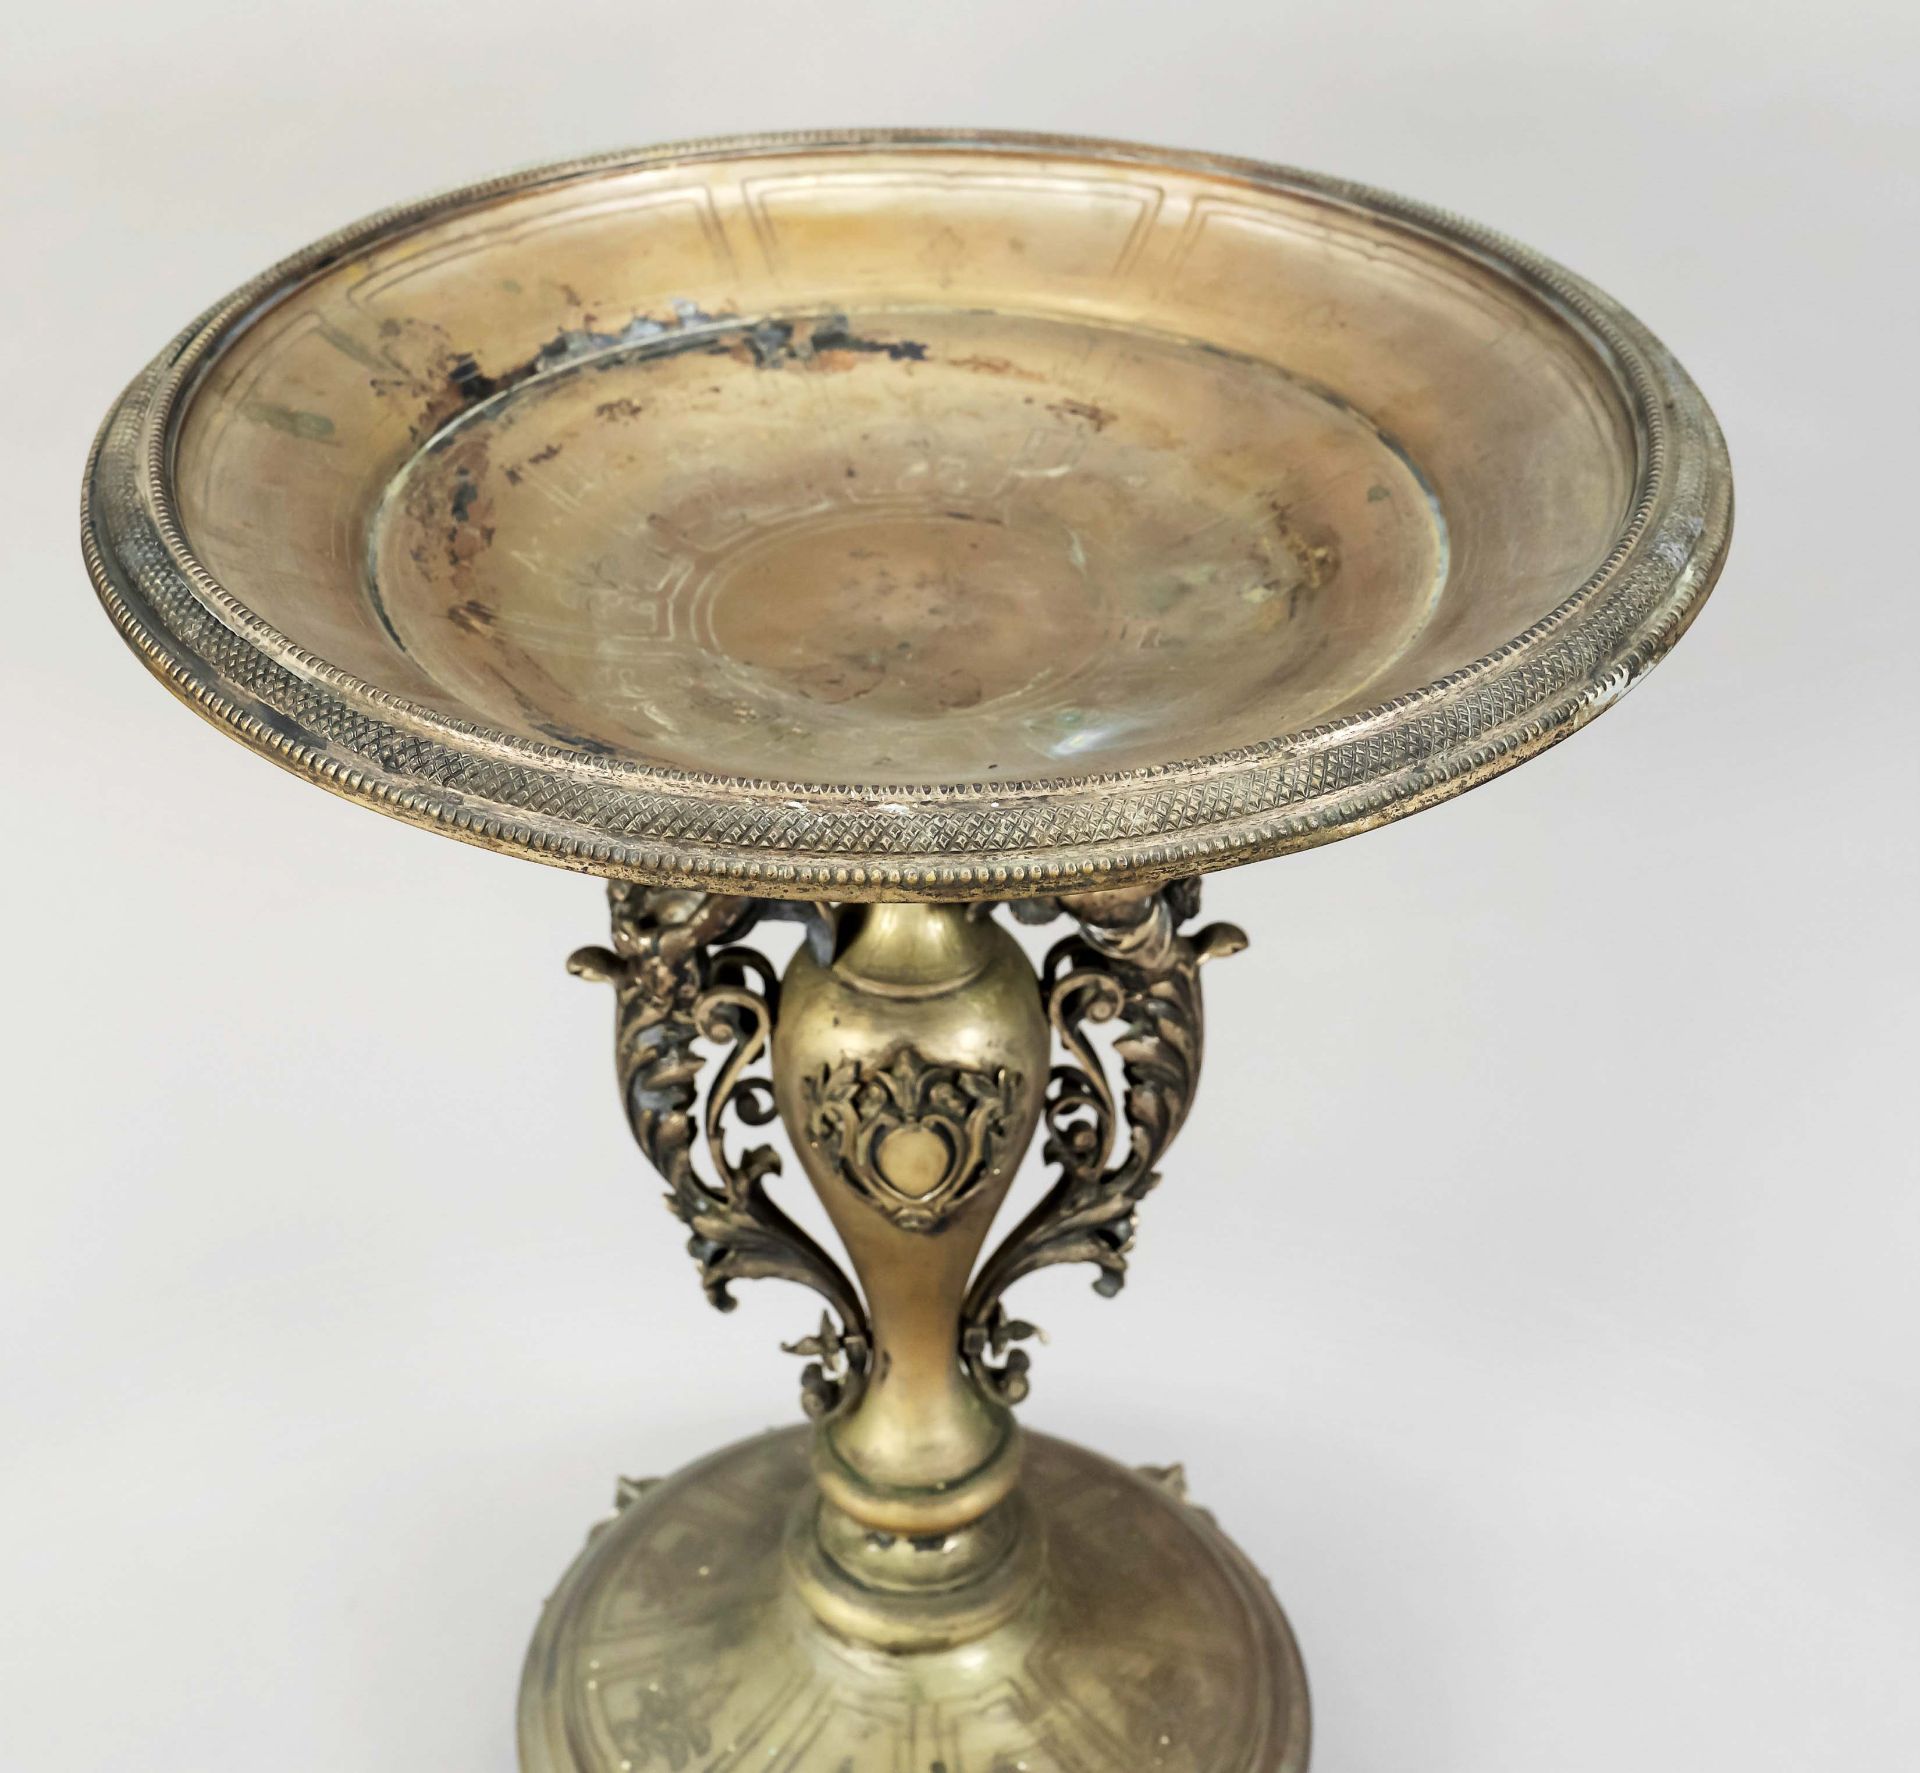 Large centerpiece, end of 19th century, silver tested, round vaulted stand on 4 decorated feet, - Image 2 of 2